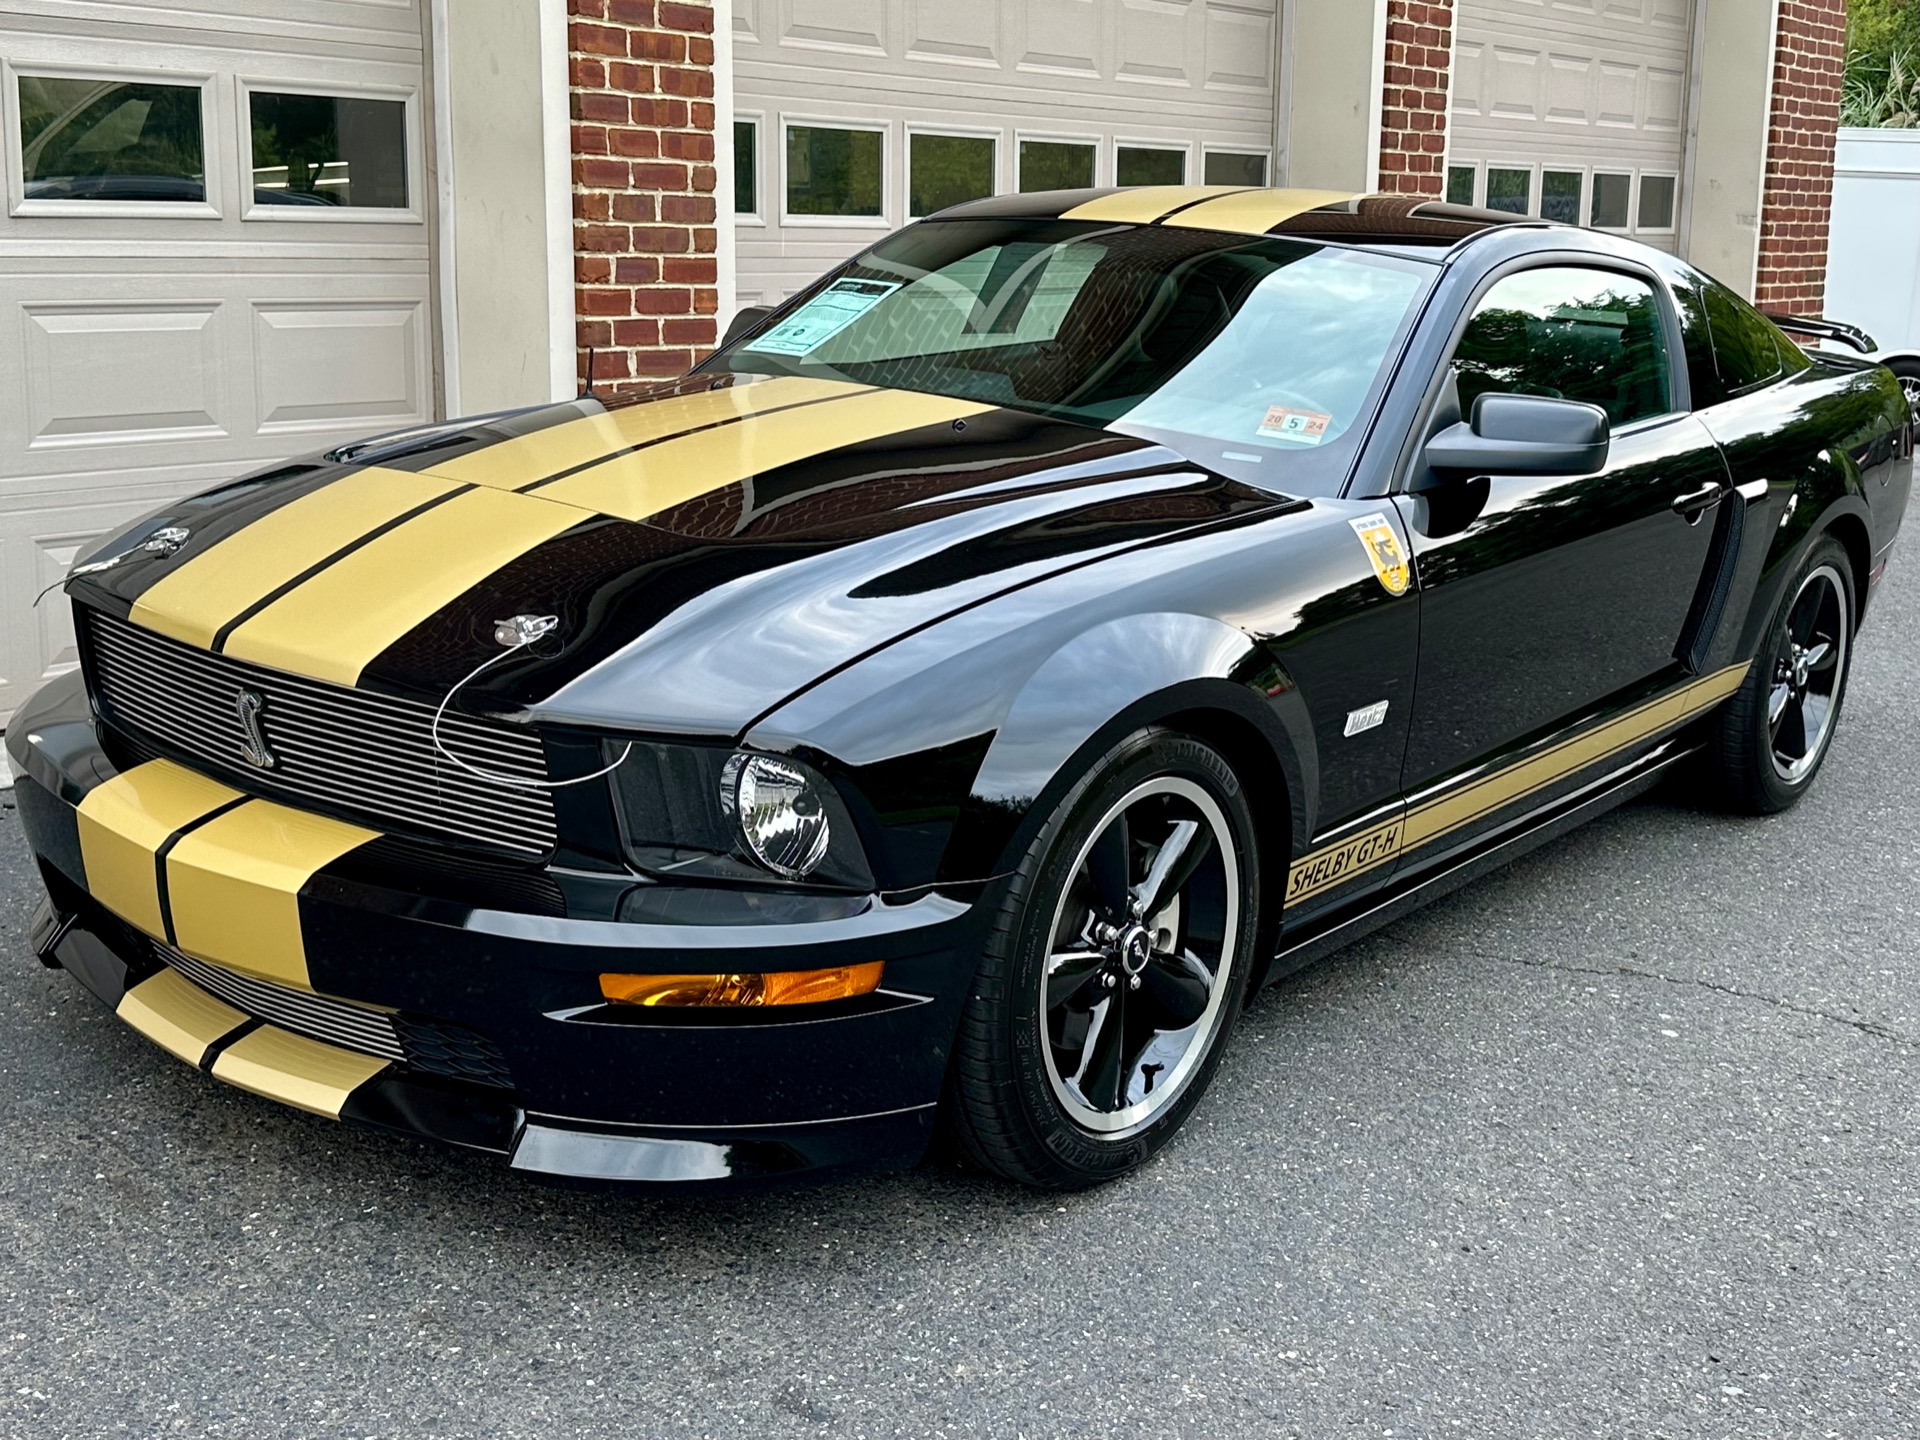 Used-2006-Ford-Mustang-Shelby-GT-H